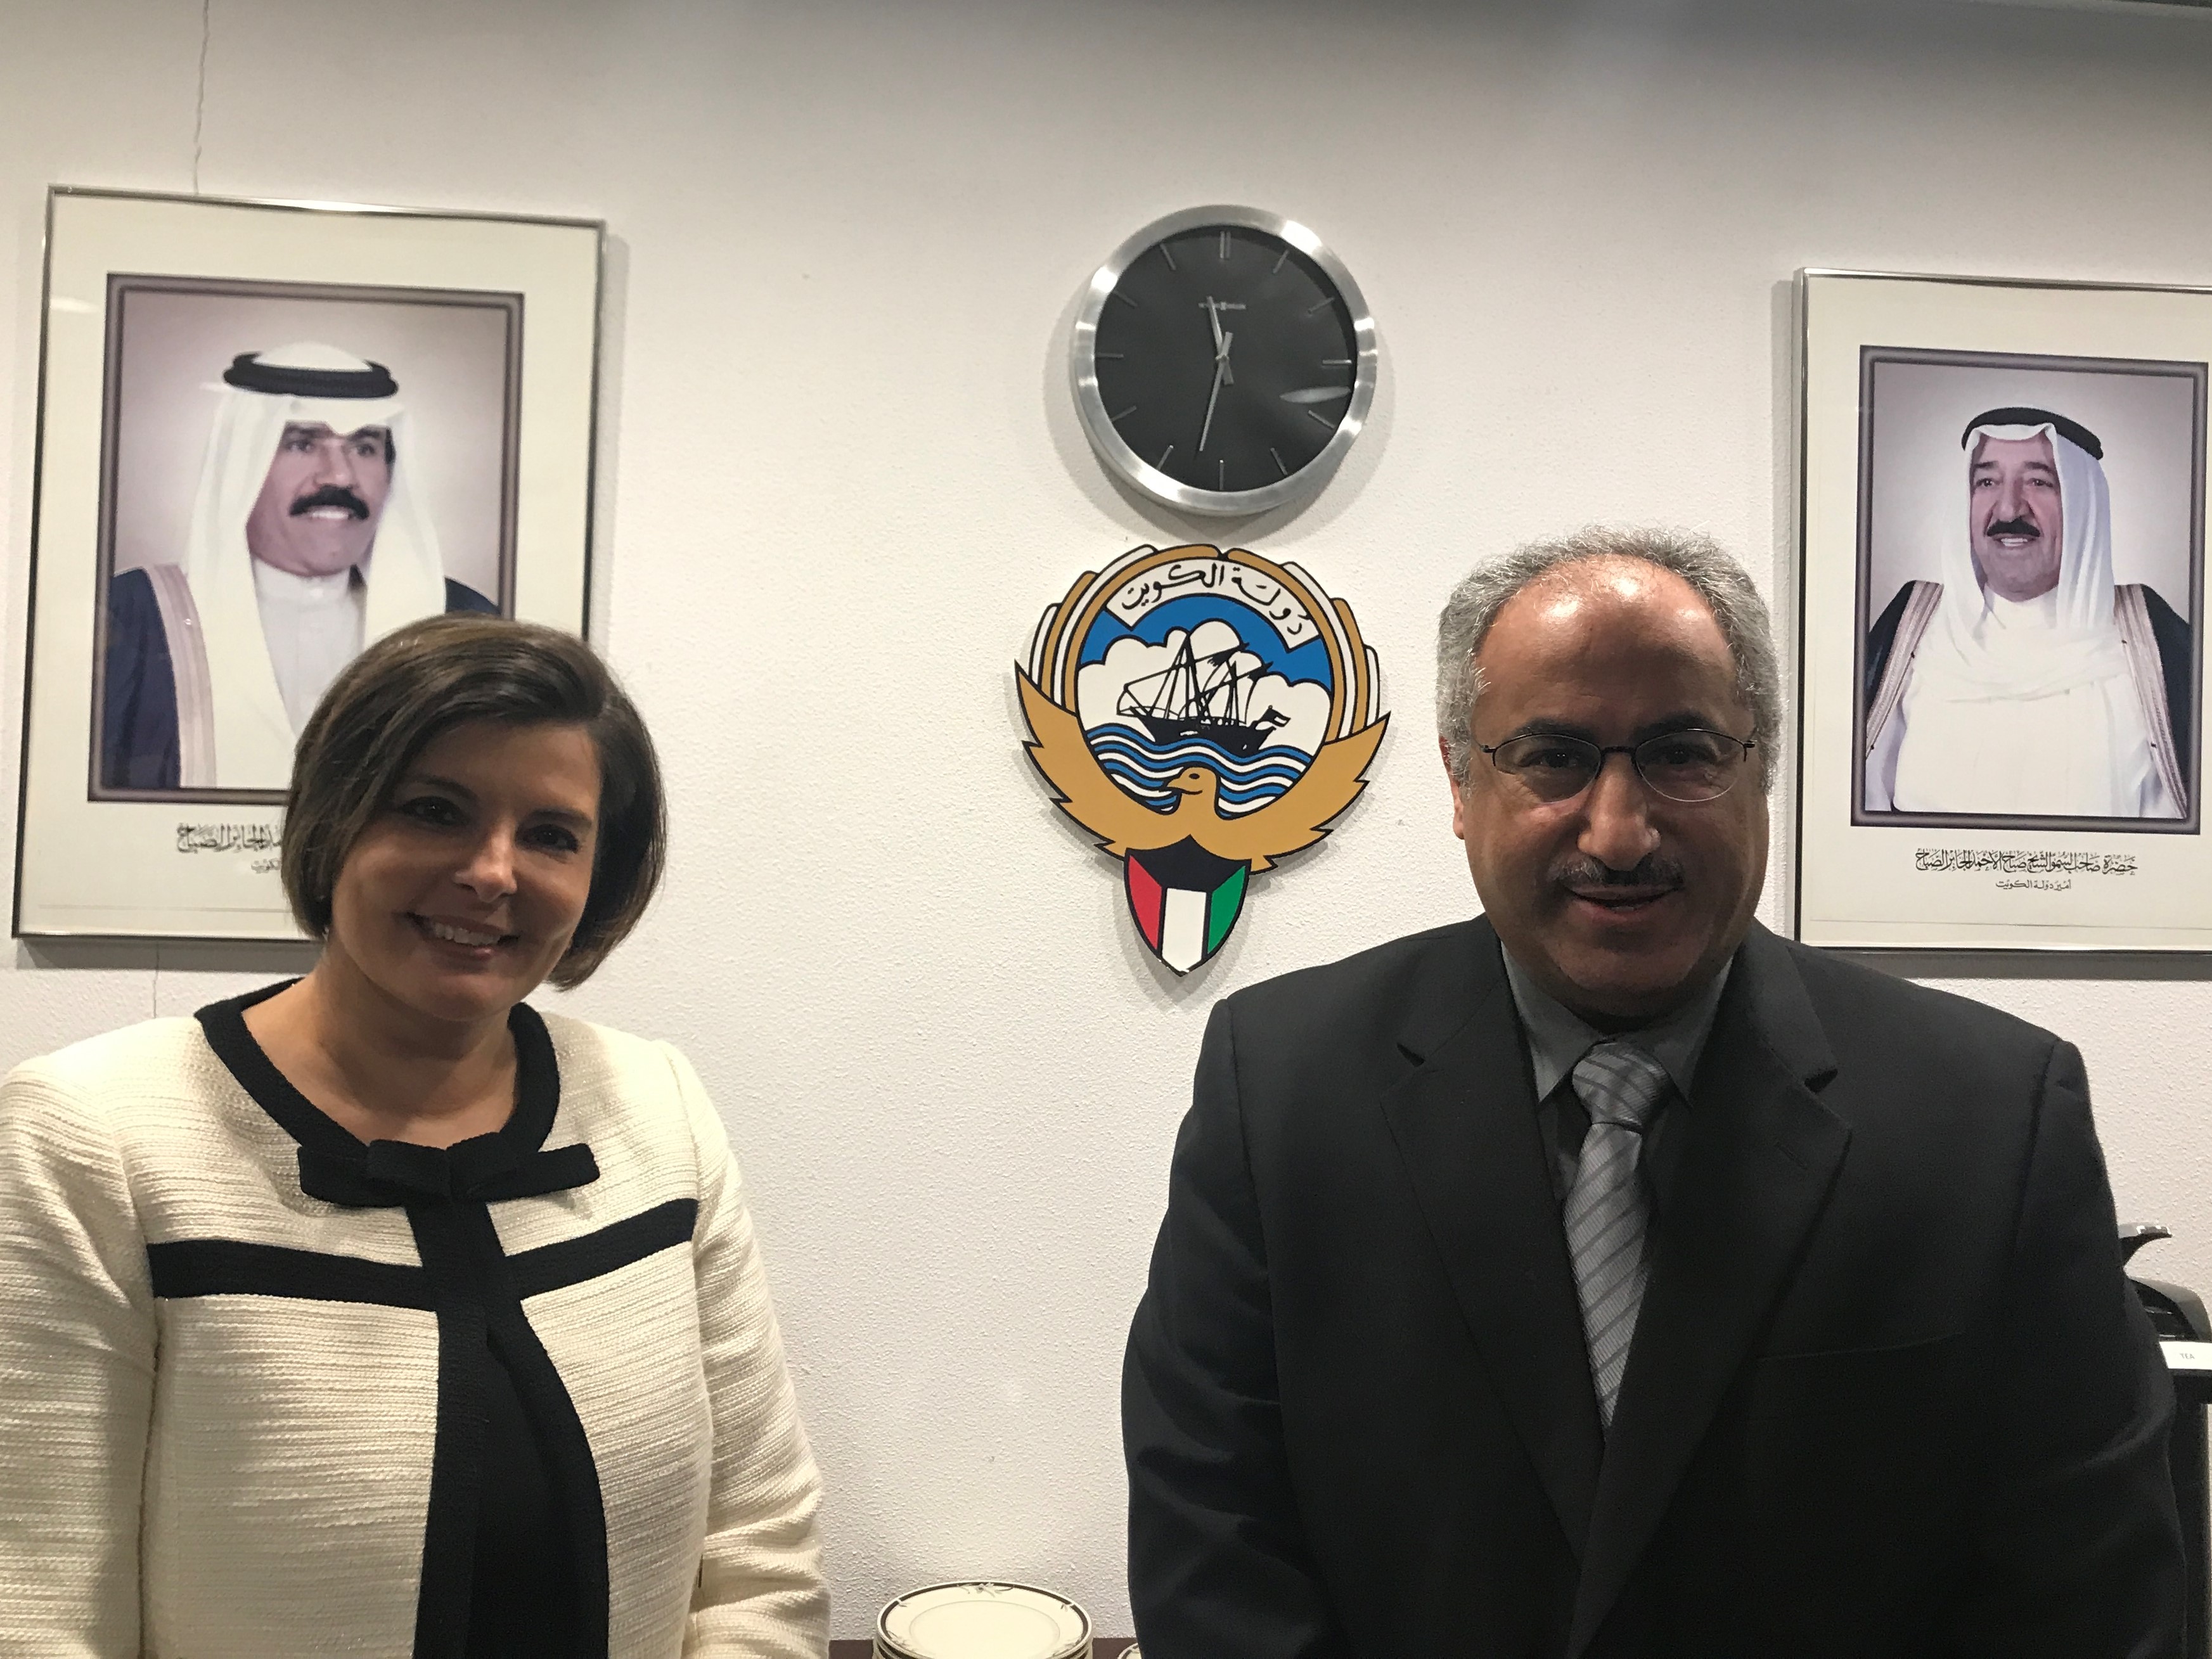 Kuwaiti Minister of Education and Minister of Higher Education Mohammad Al-Faris with head of the office Aseel Al-Awadhi